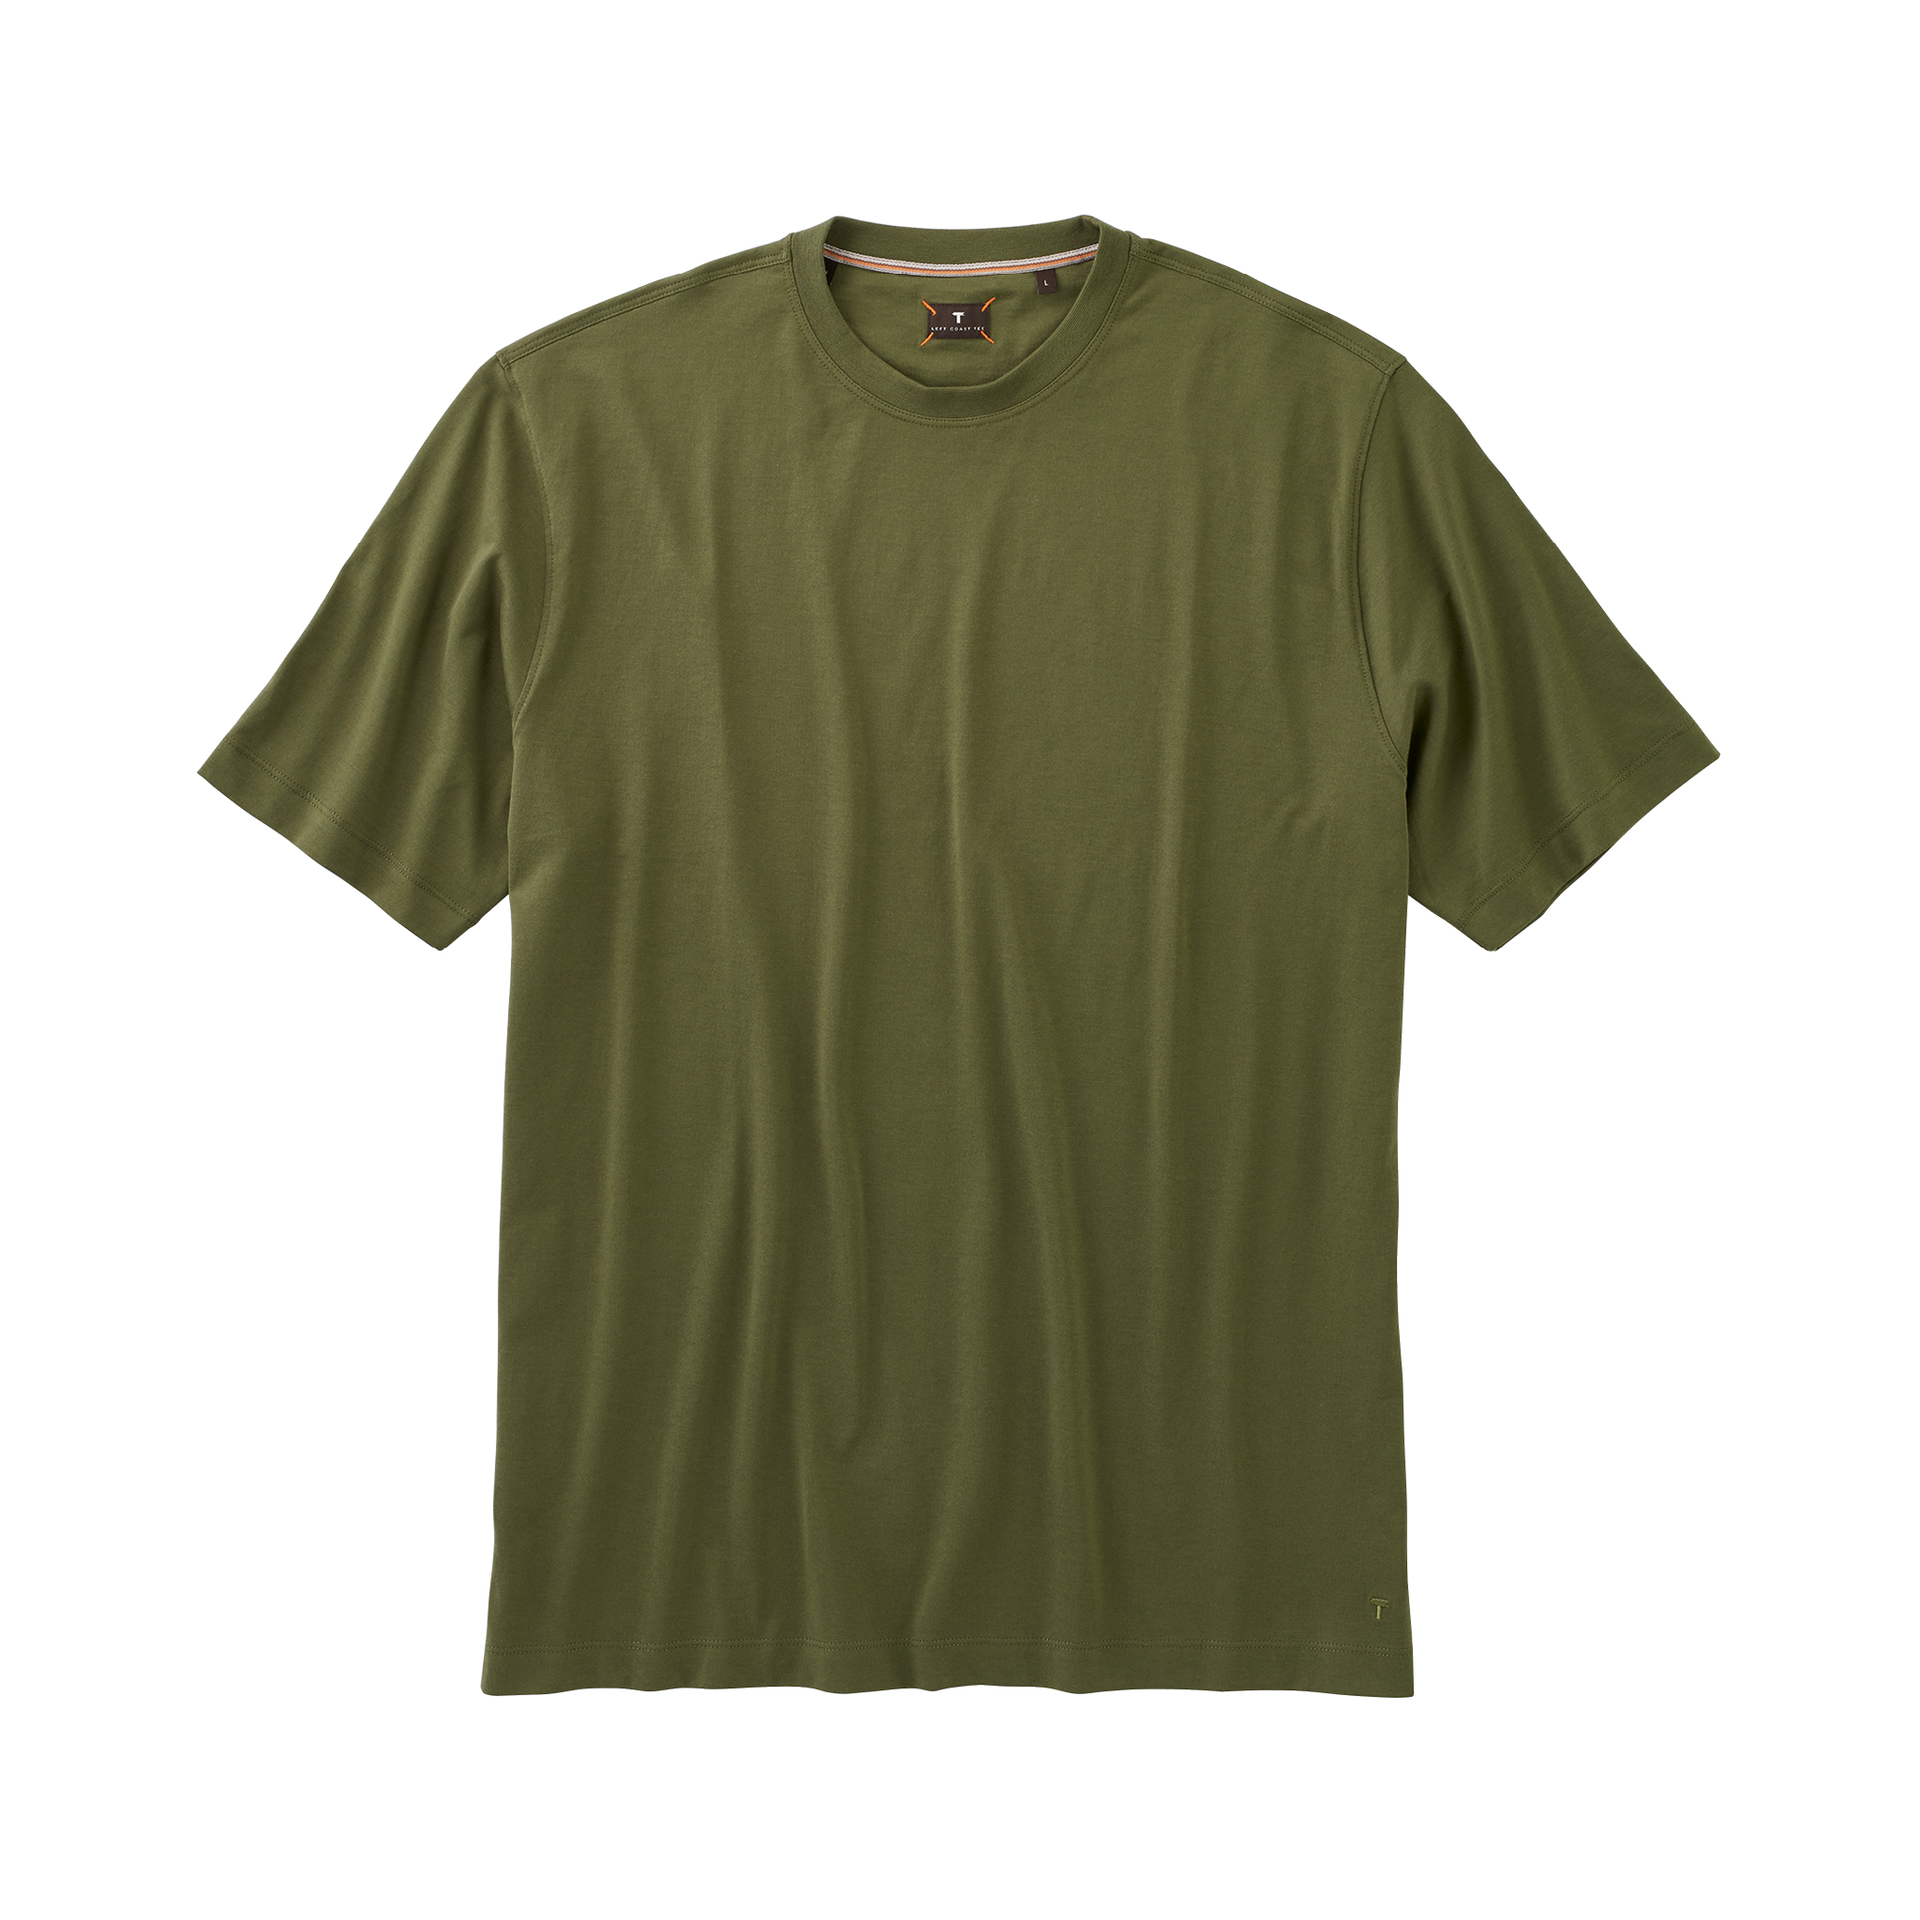 Crew Neck Peruvian Cotton Tee Shirt in Olive by Left Coast Tee